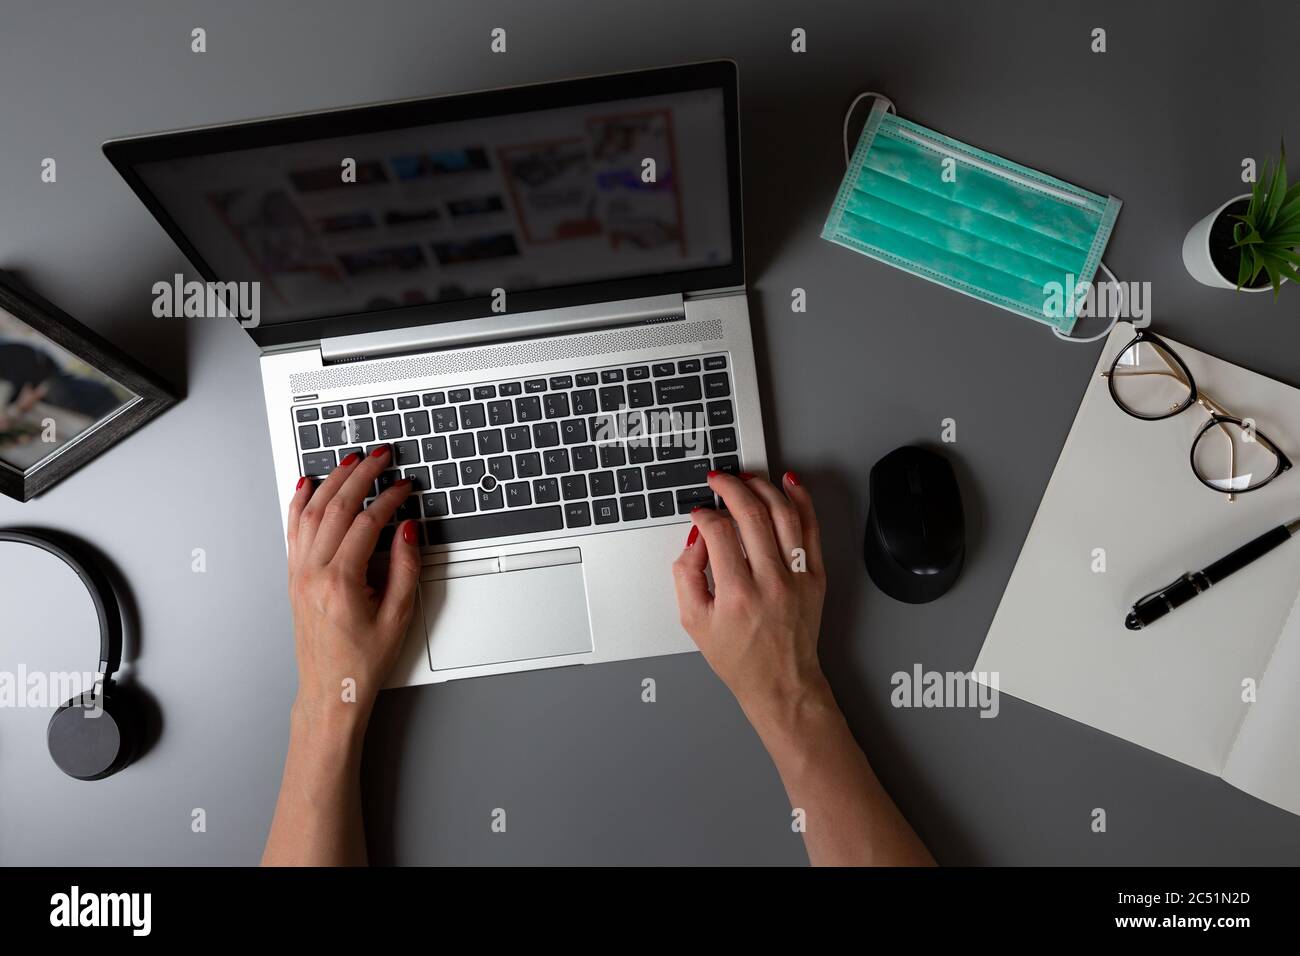 Top view of home office. Women's hands typing on laptop on a gray table with facial protection mask. Stock Photo